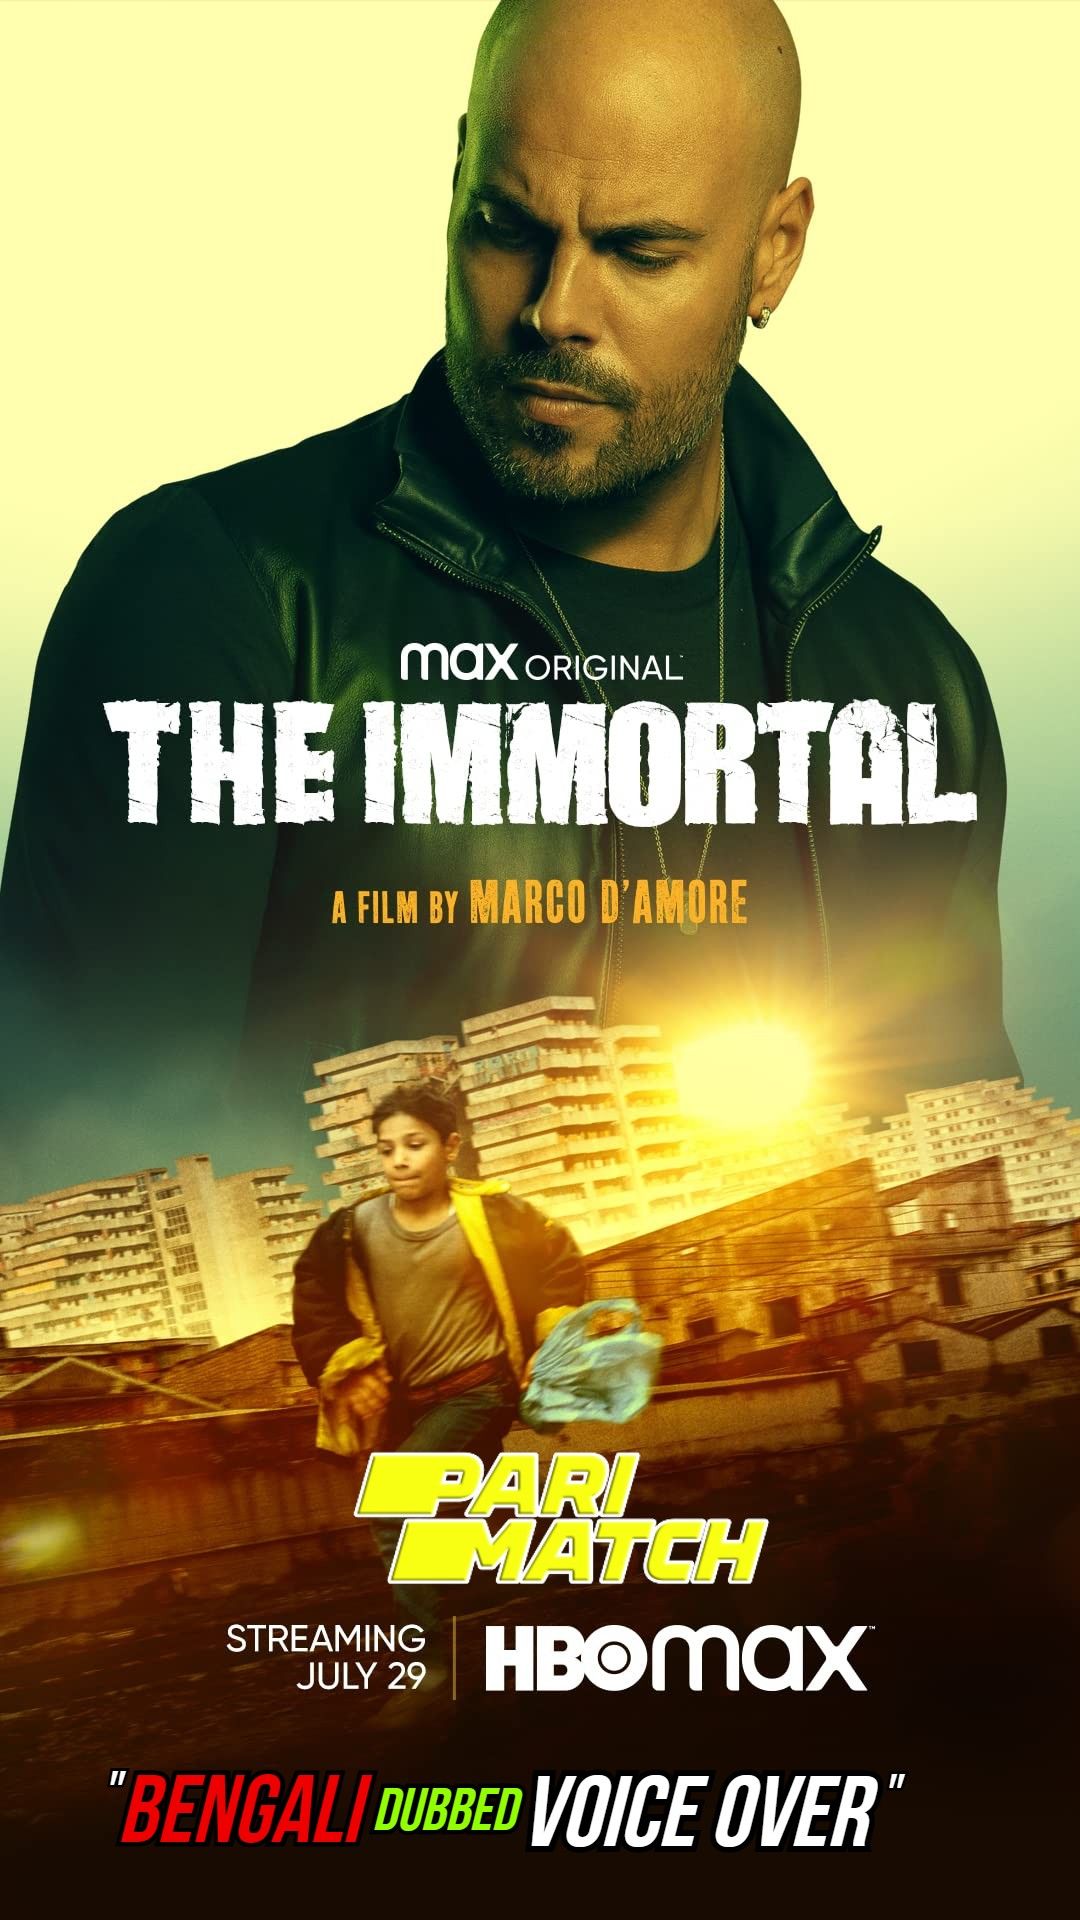 The Immortal (2019) Bengali (Voice Over) Dubbed BluRay download full movie